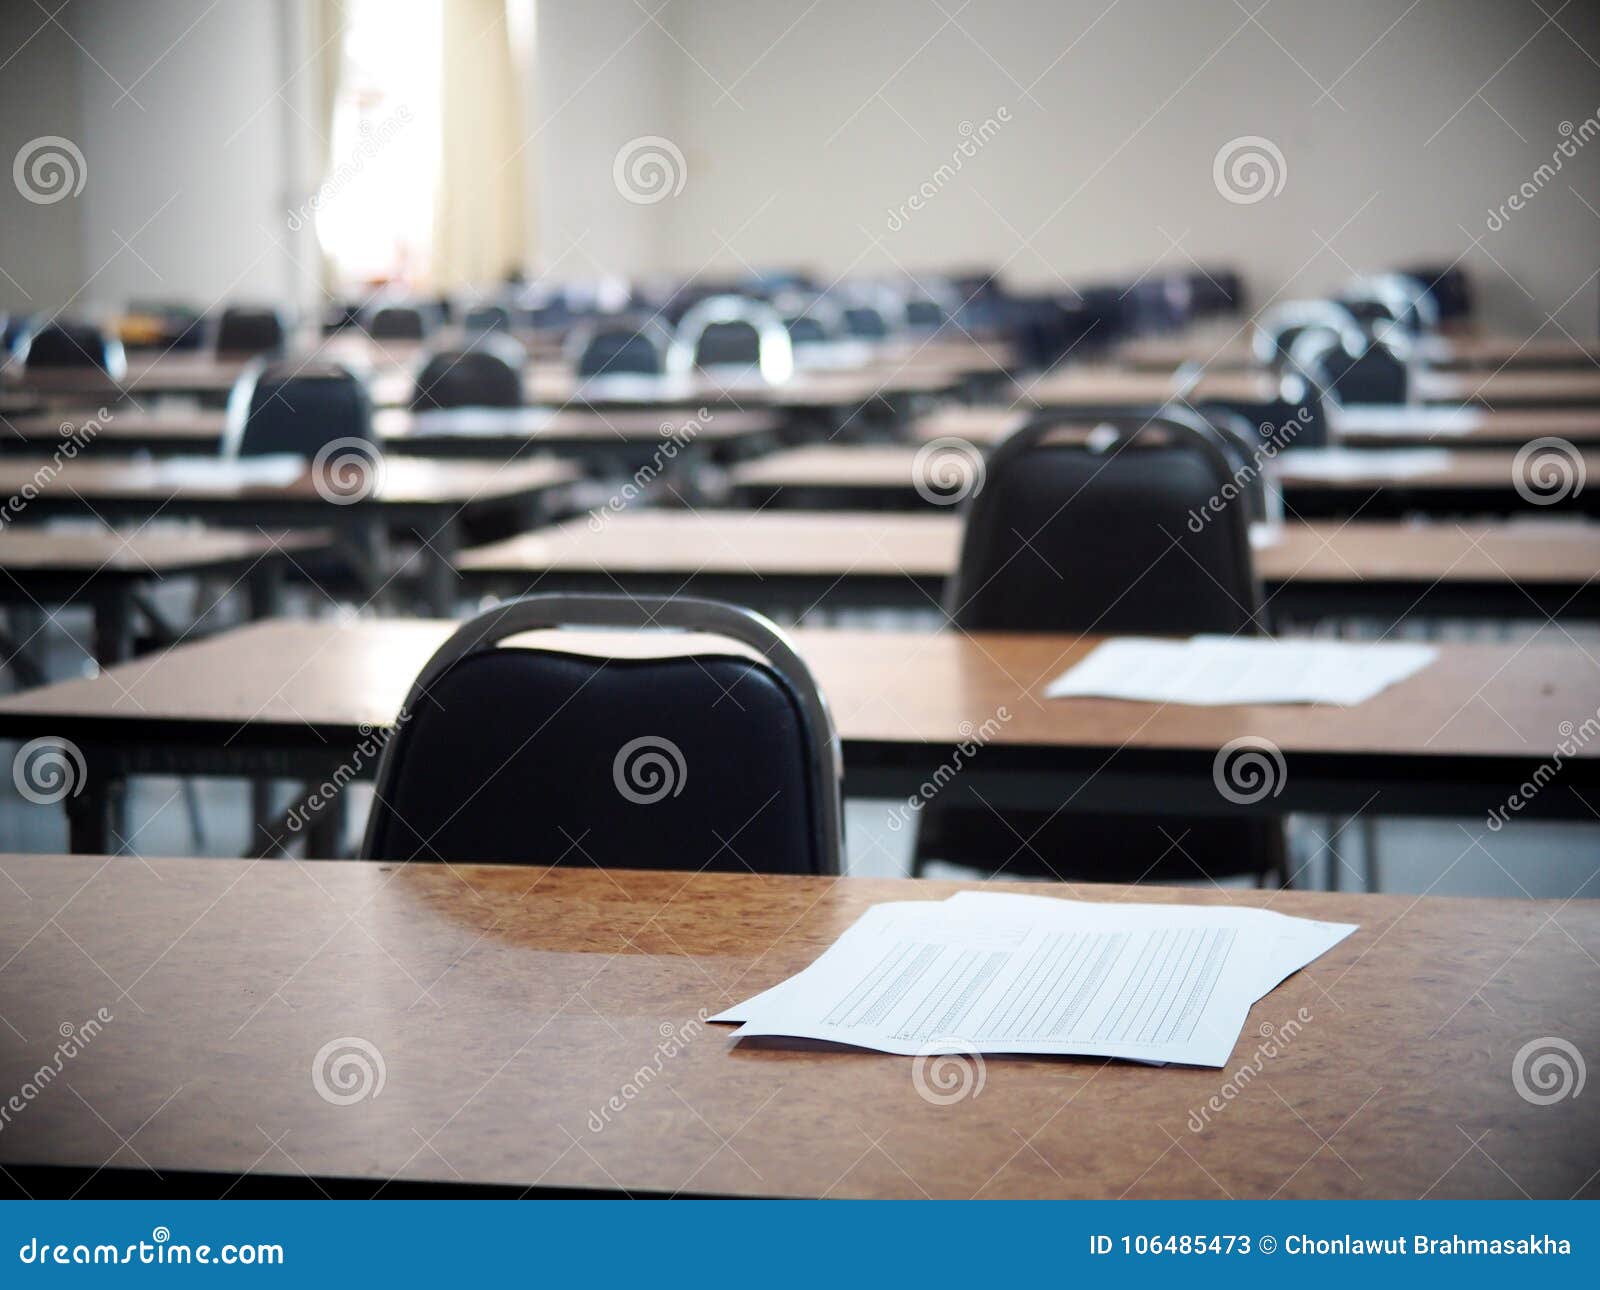 school empty cold exam class room desk and chair